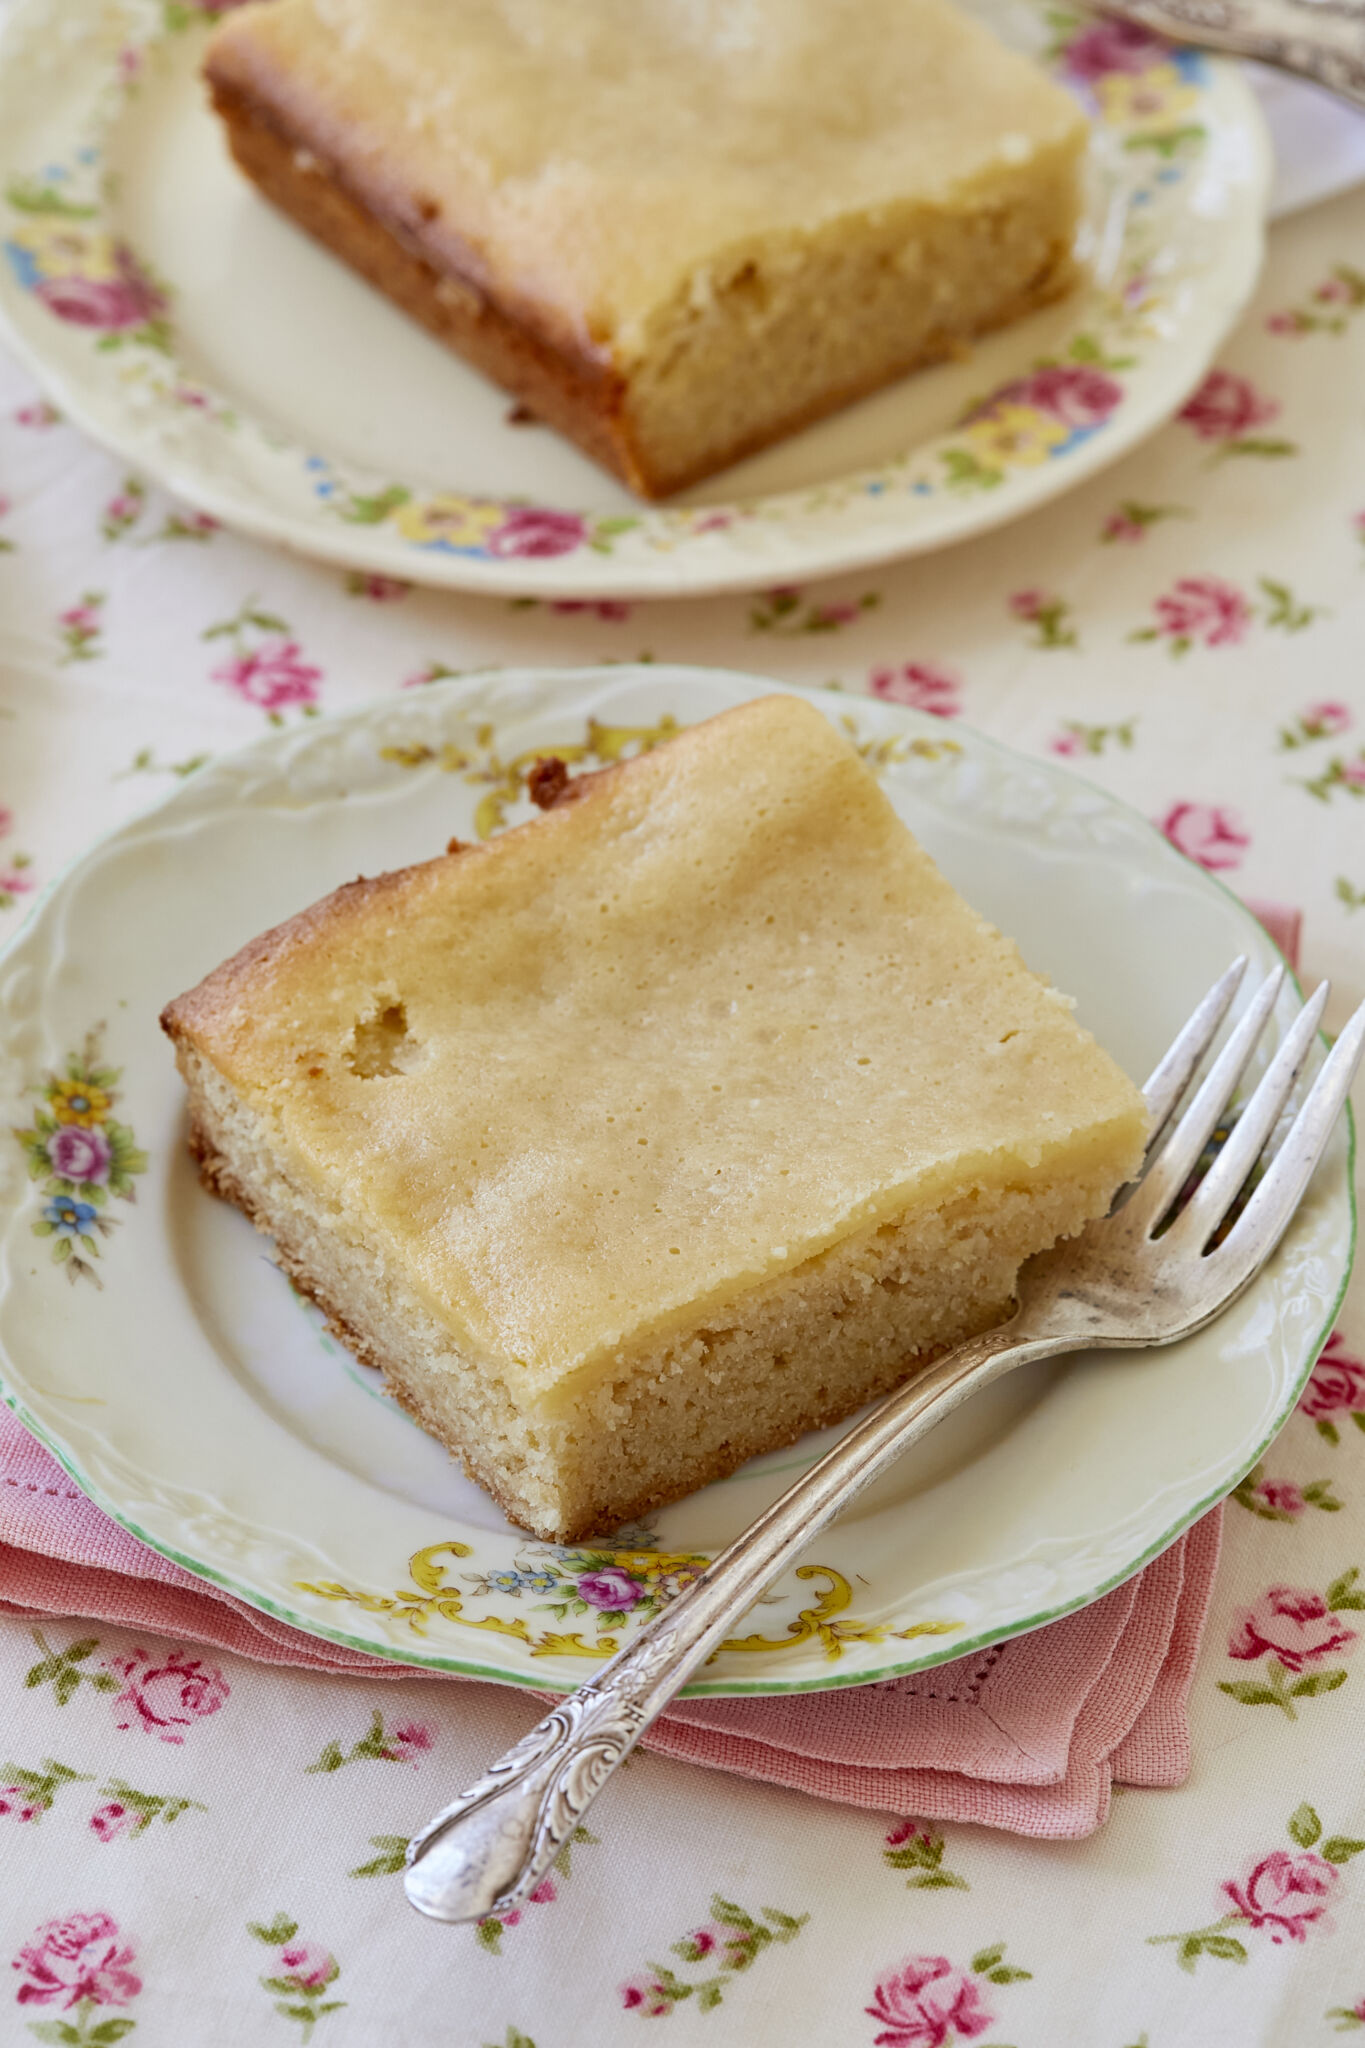 Two pieces of maple gooey butter cake on white plates with silver forks, on pink linen napkins on a floral tablecloth.